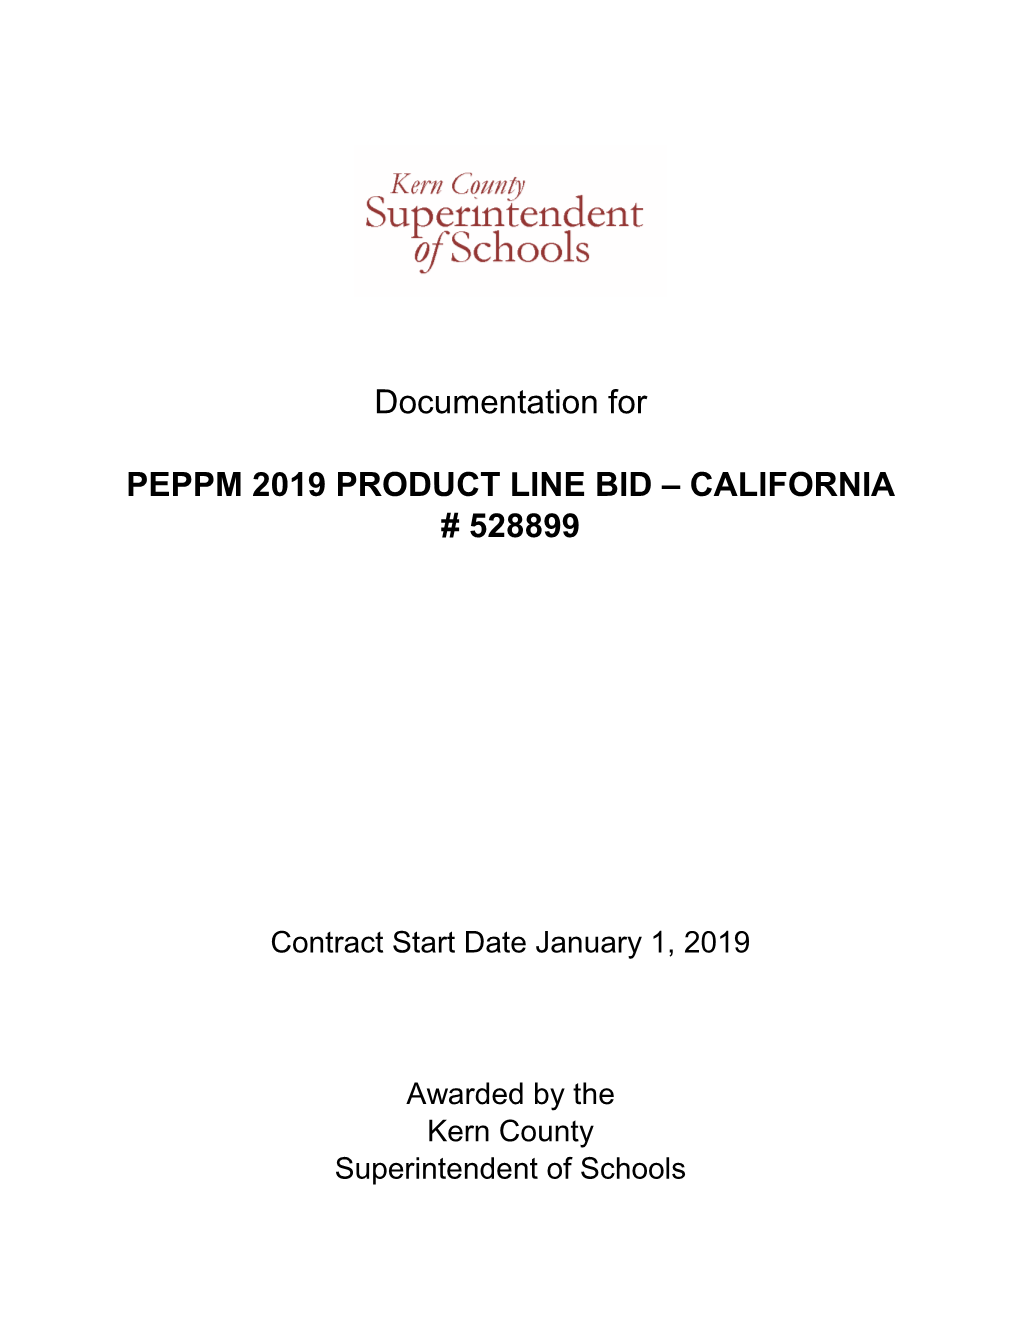 Documentation for PEPPM 2019 PRODUCT LINE